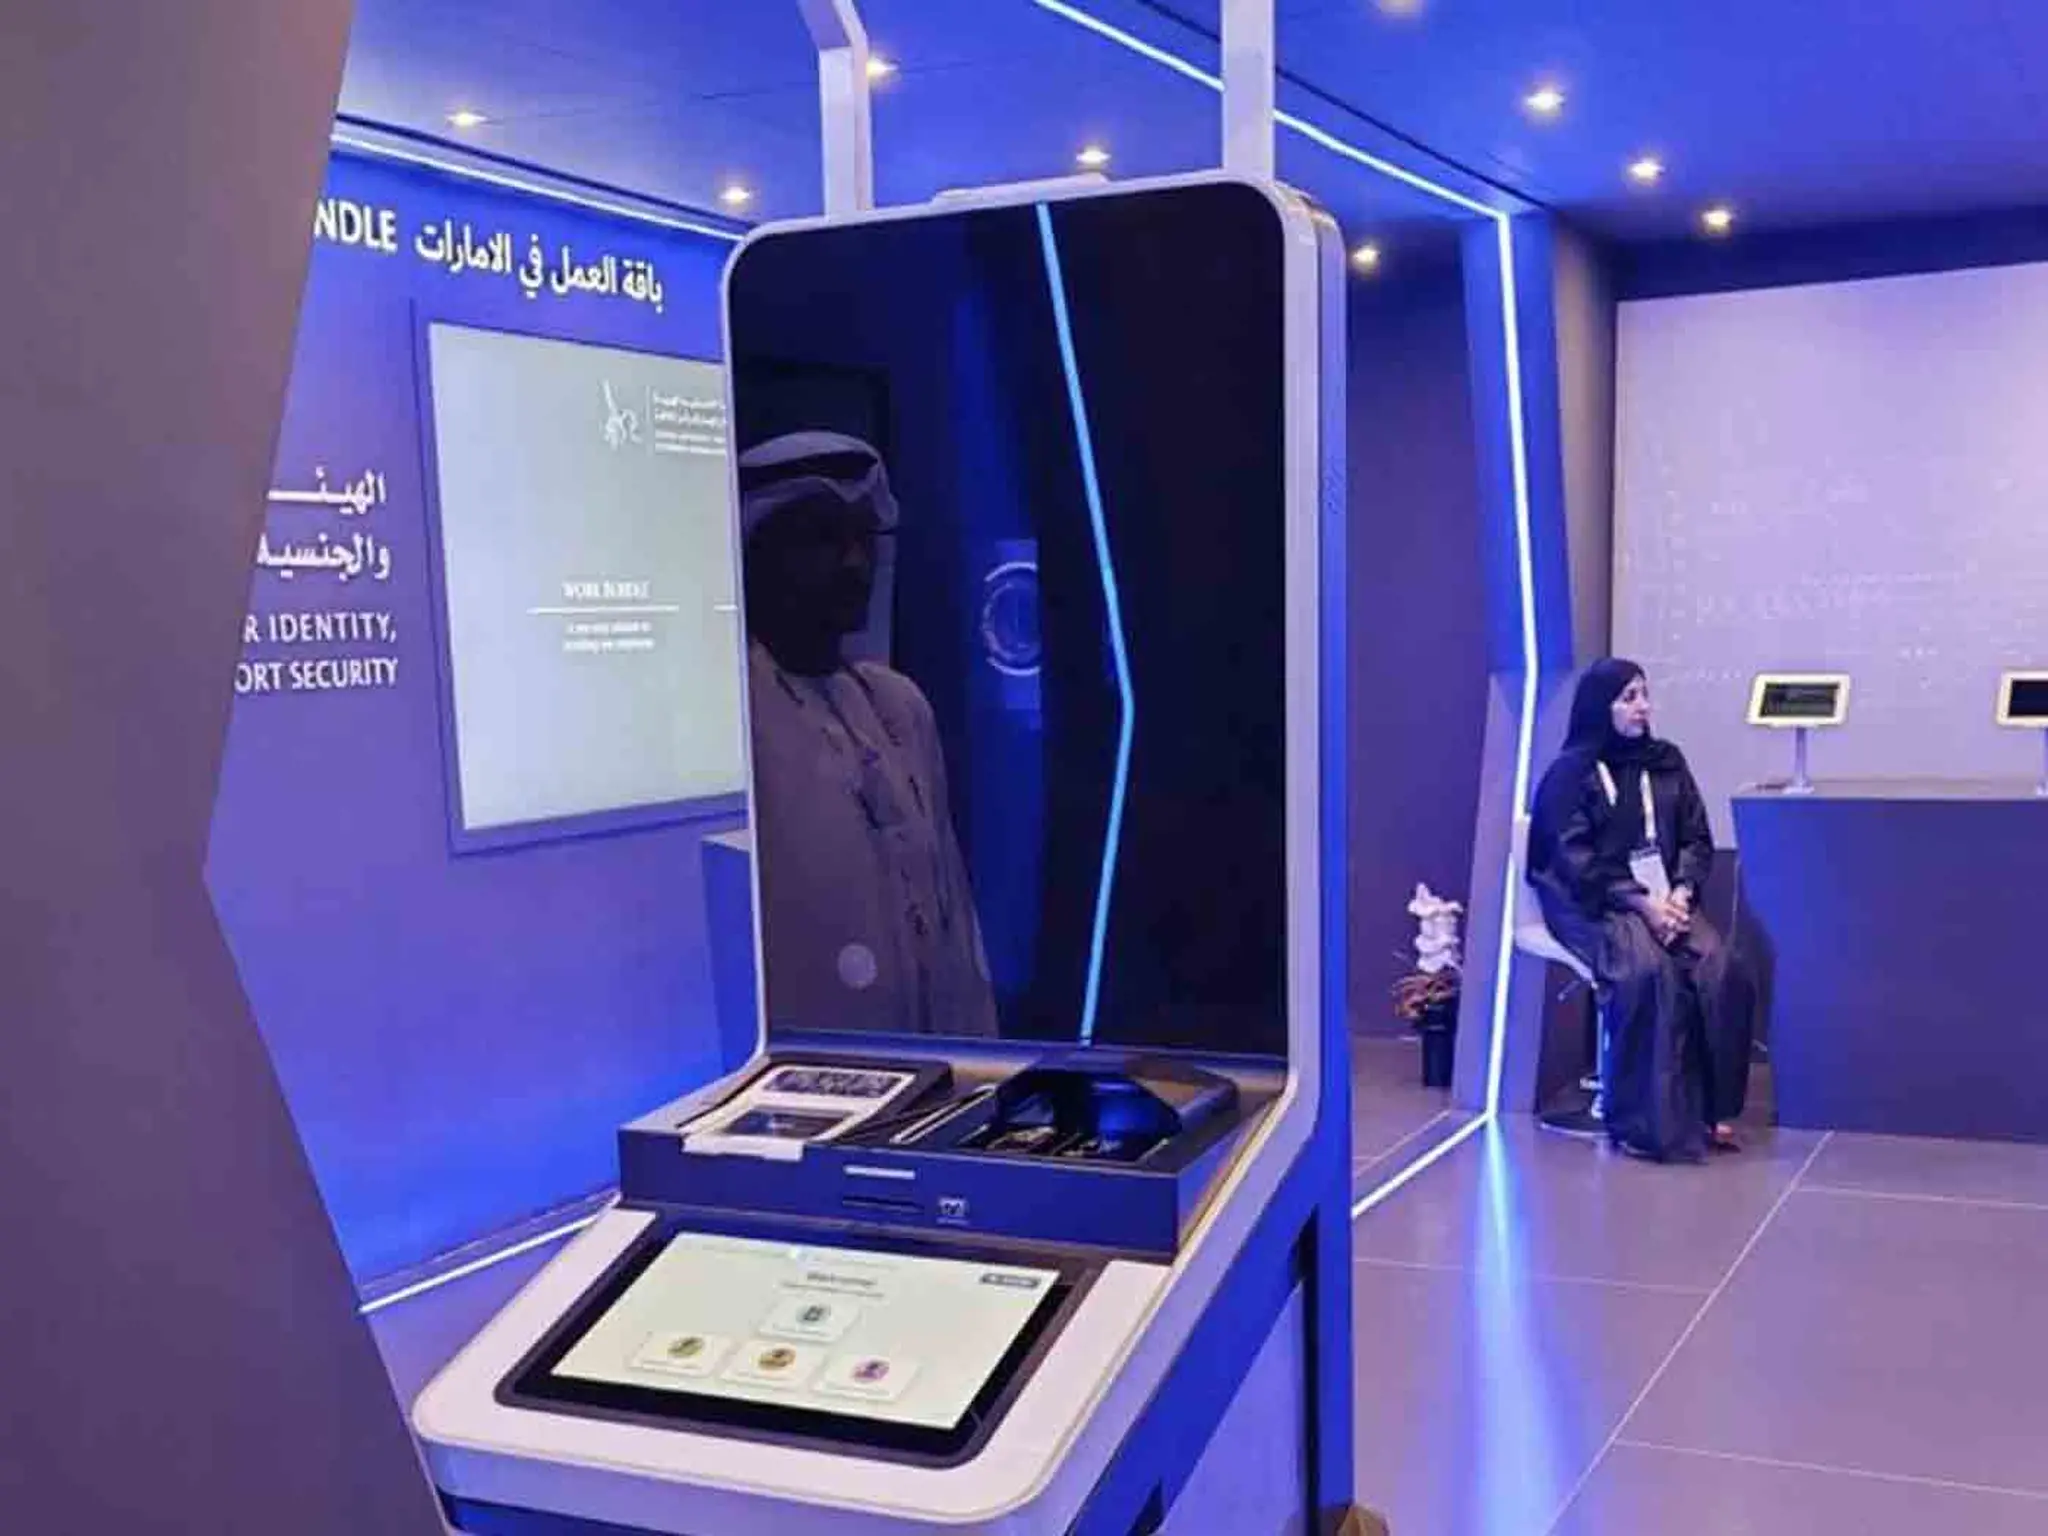 The UAE unveils a new innovation to renew passports and Emirati ID instantly